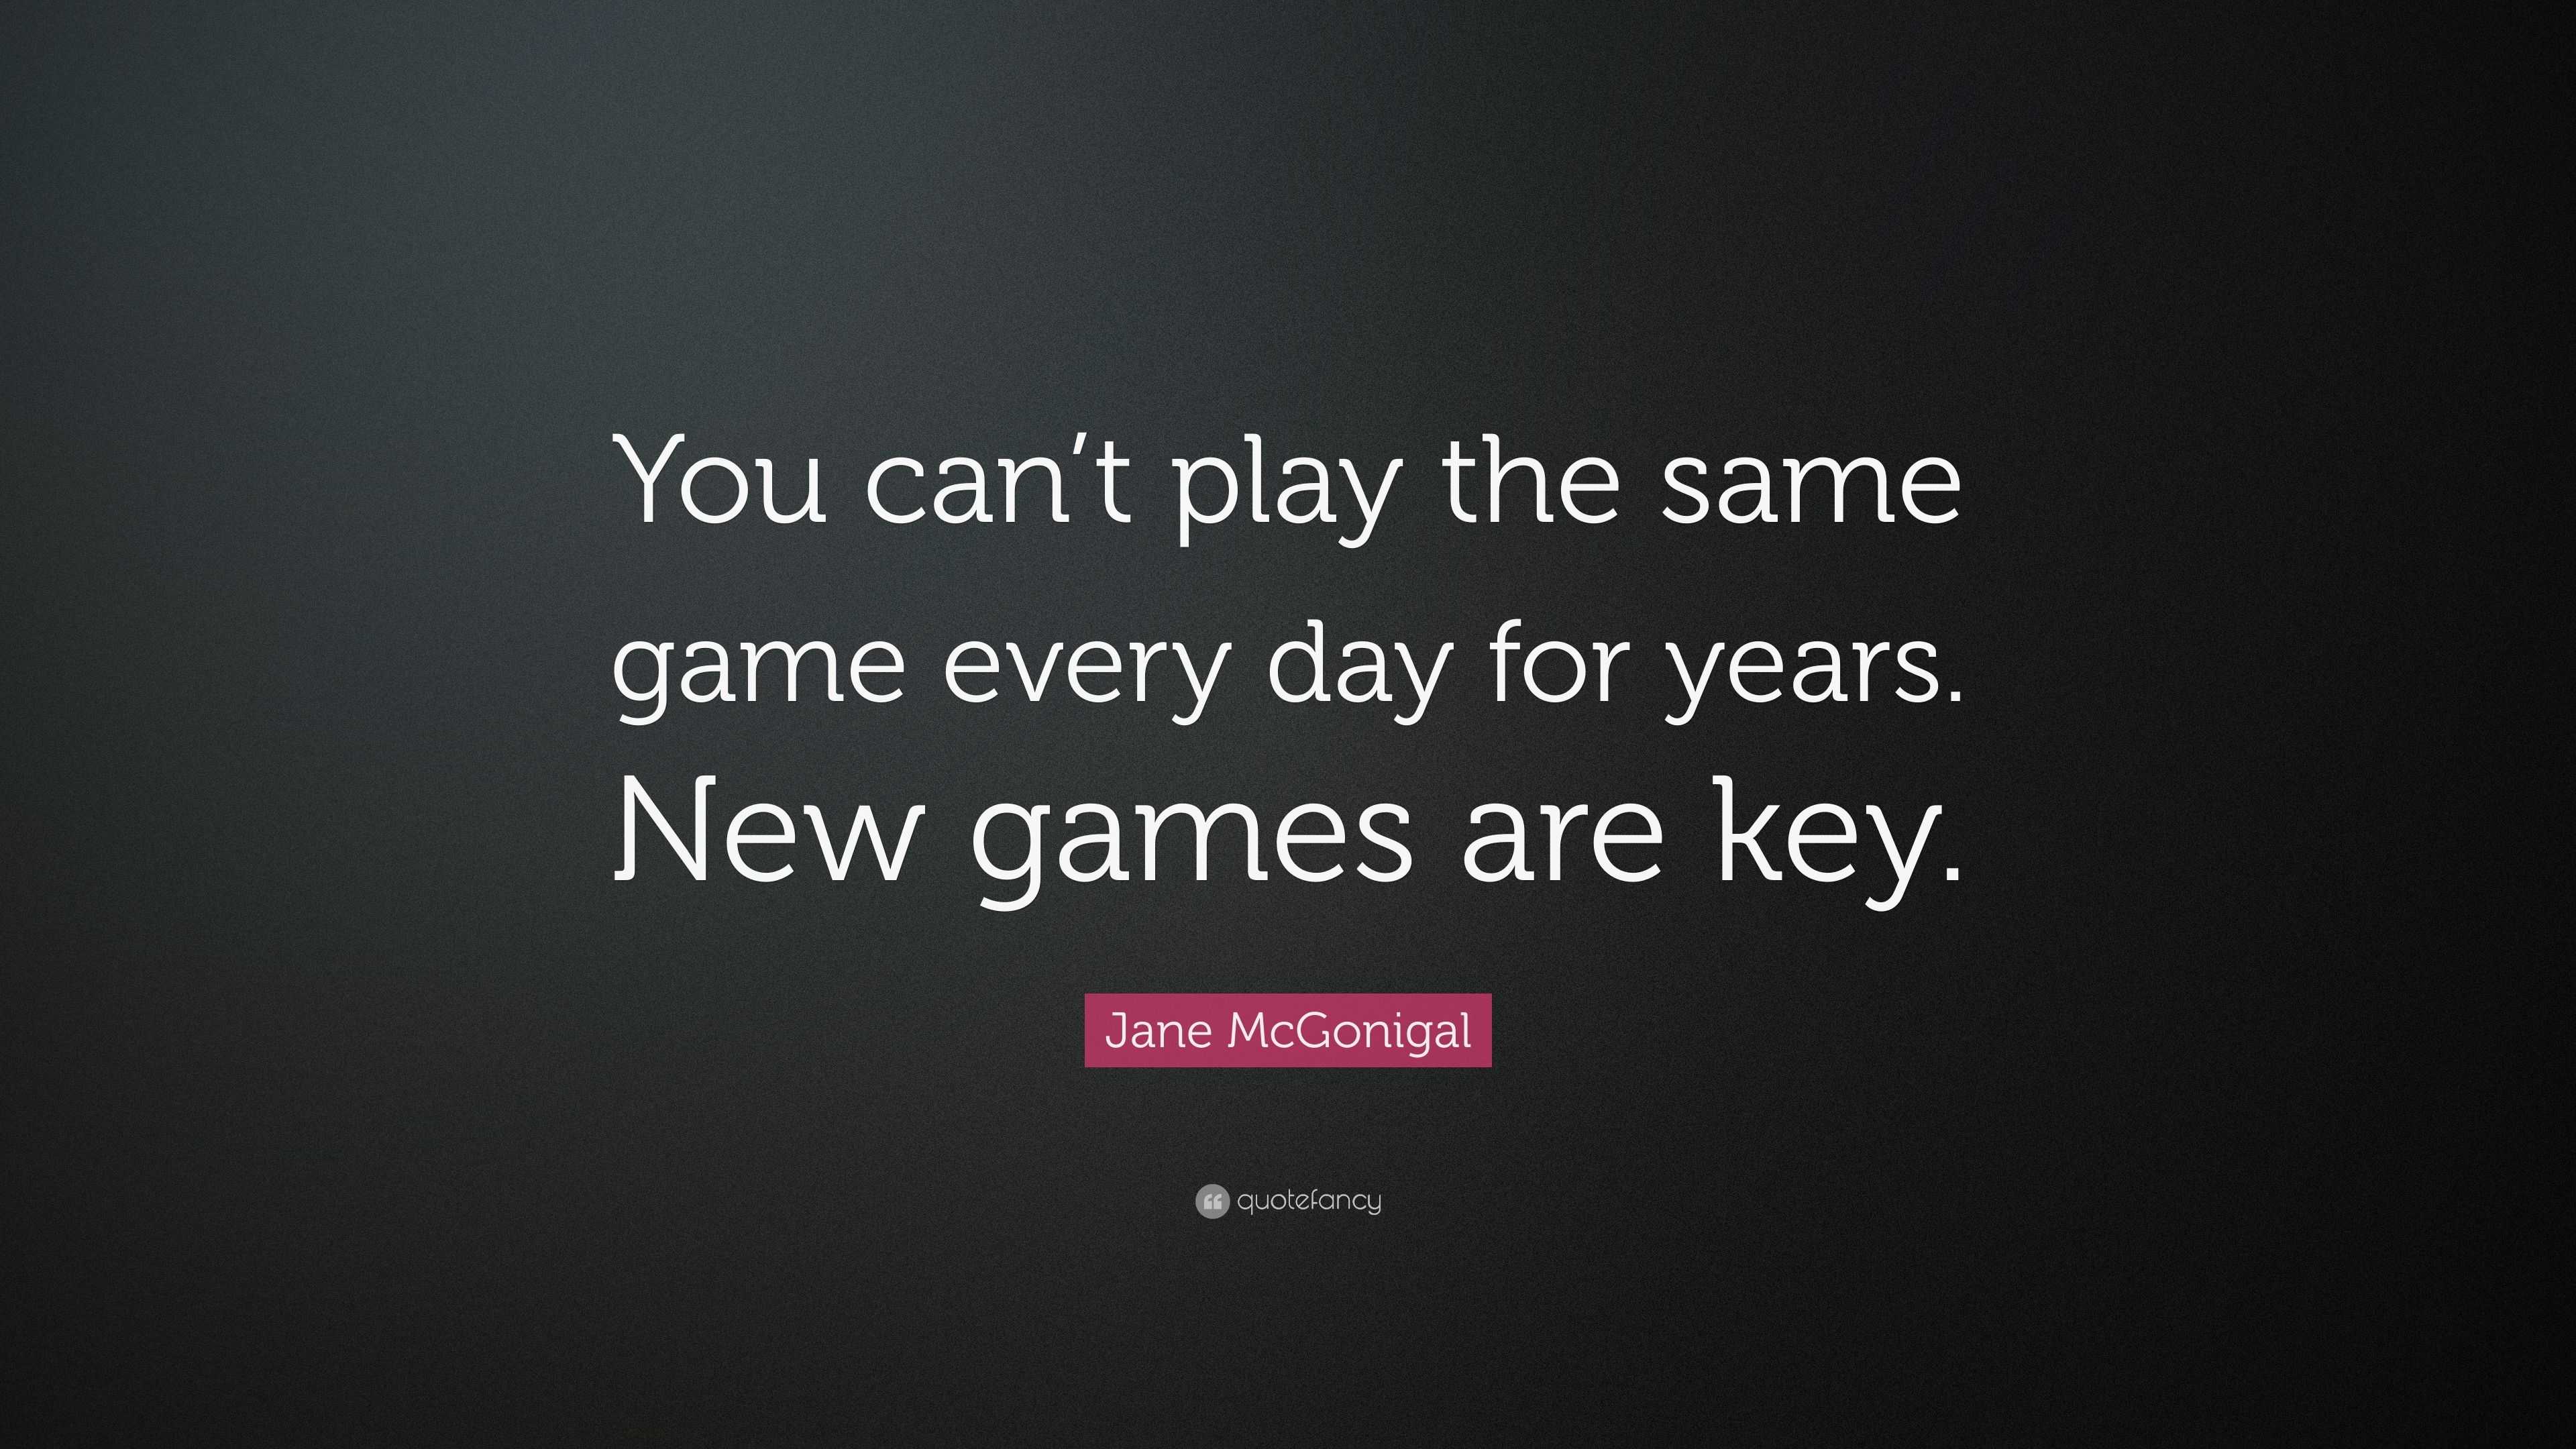 Jane McGonigal Quote: “You can’t play the same game every day for years